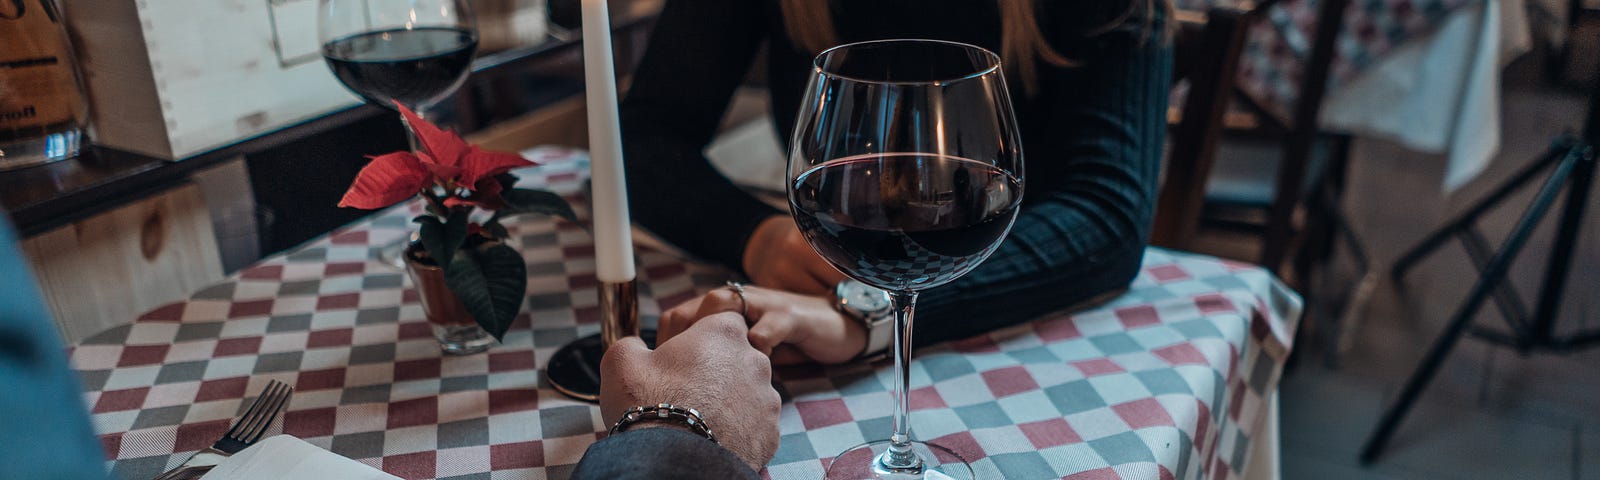 Woman and man having red wine on a date at an Italian restaurant